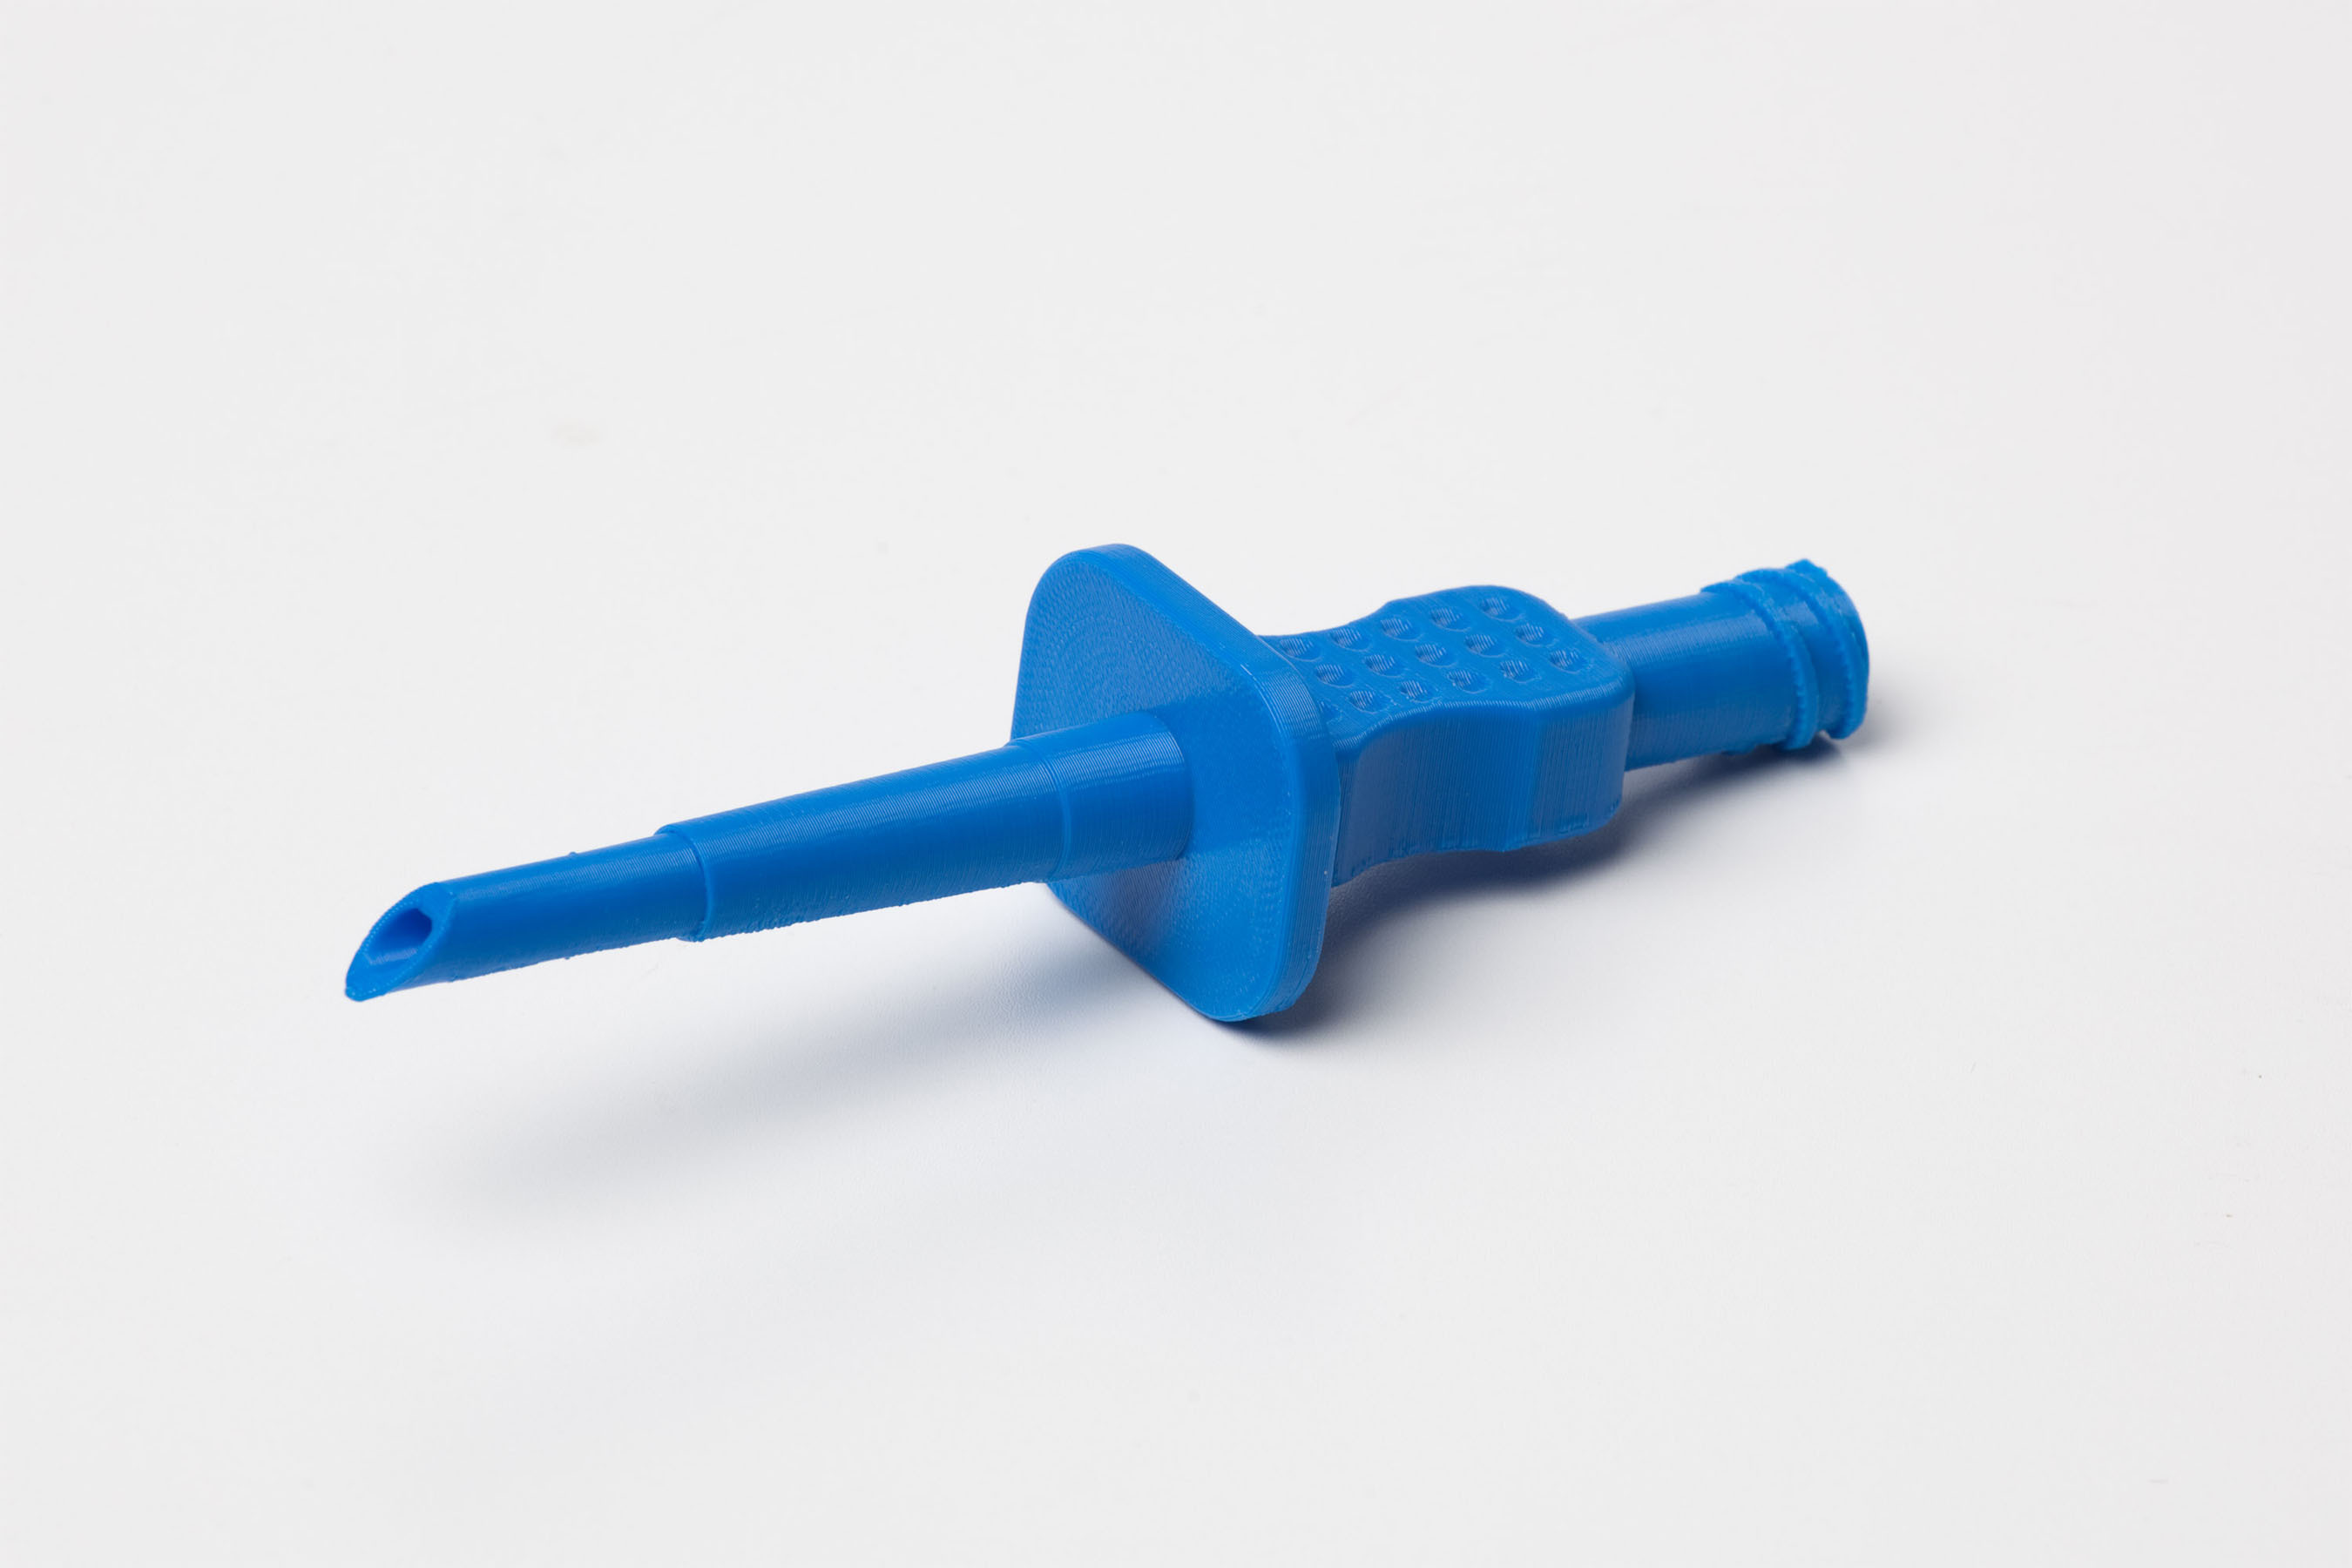 Stratasys 3D printed Saline Probe, produced from ABS Plus material, used to pierce a saline bottle and prime the Hemosep bag prior to use (PRNewsFoto/Stratasys Ltd.)